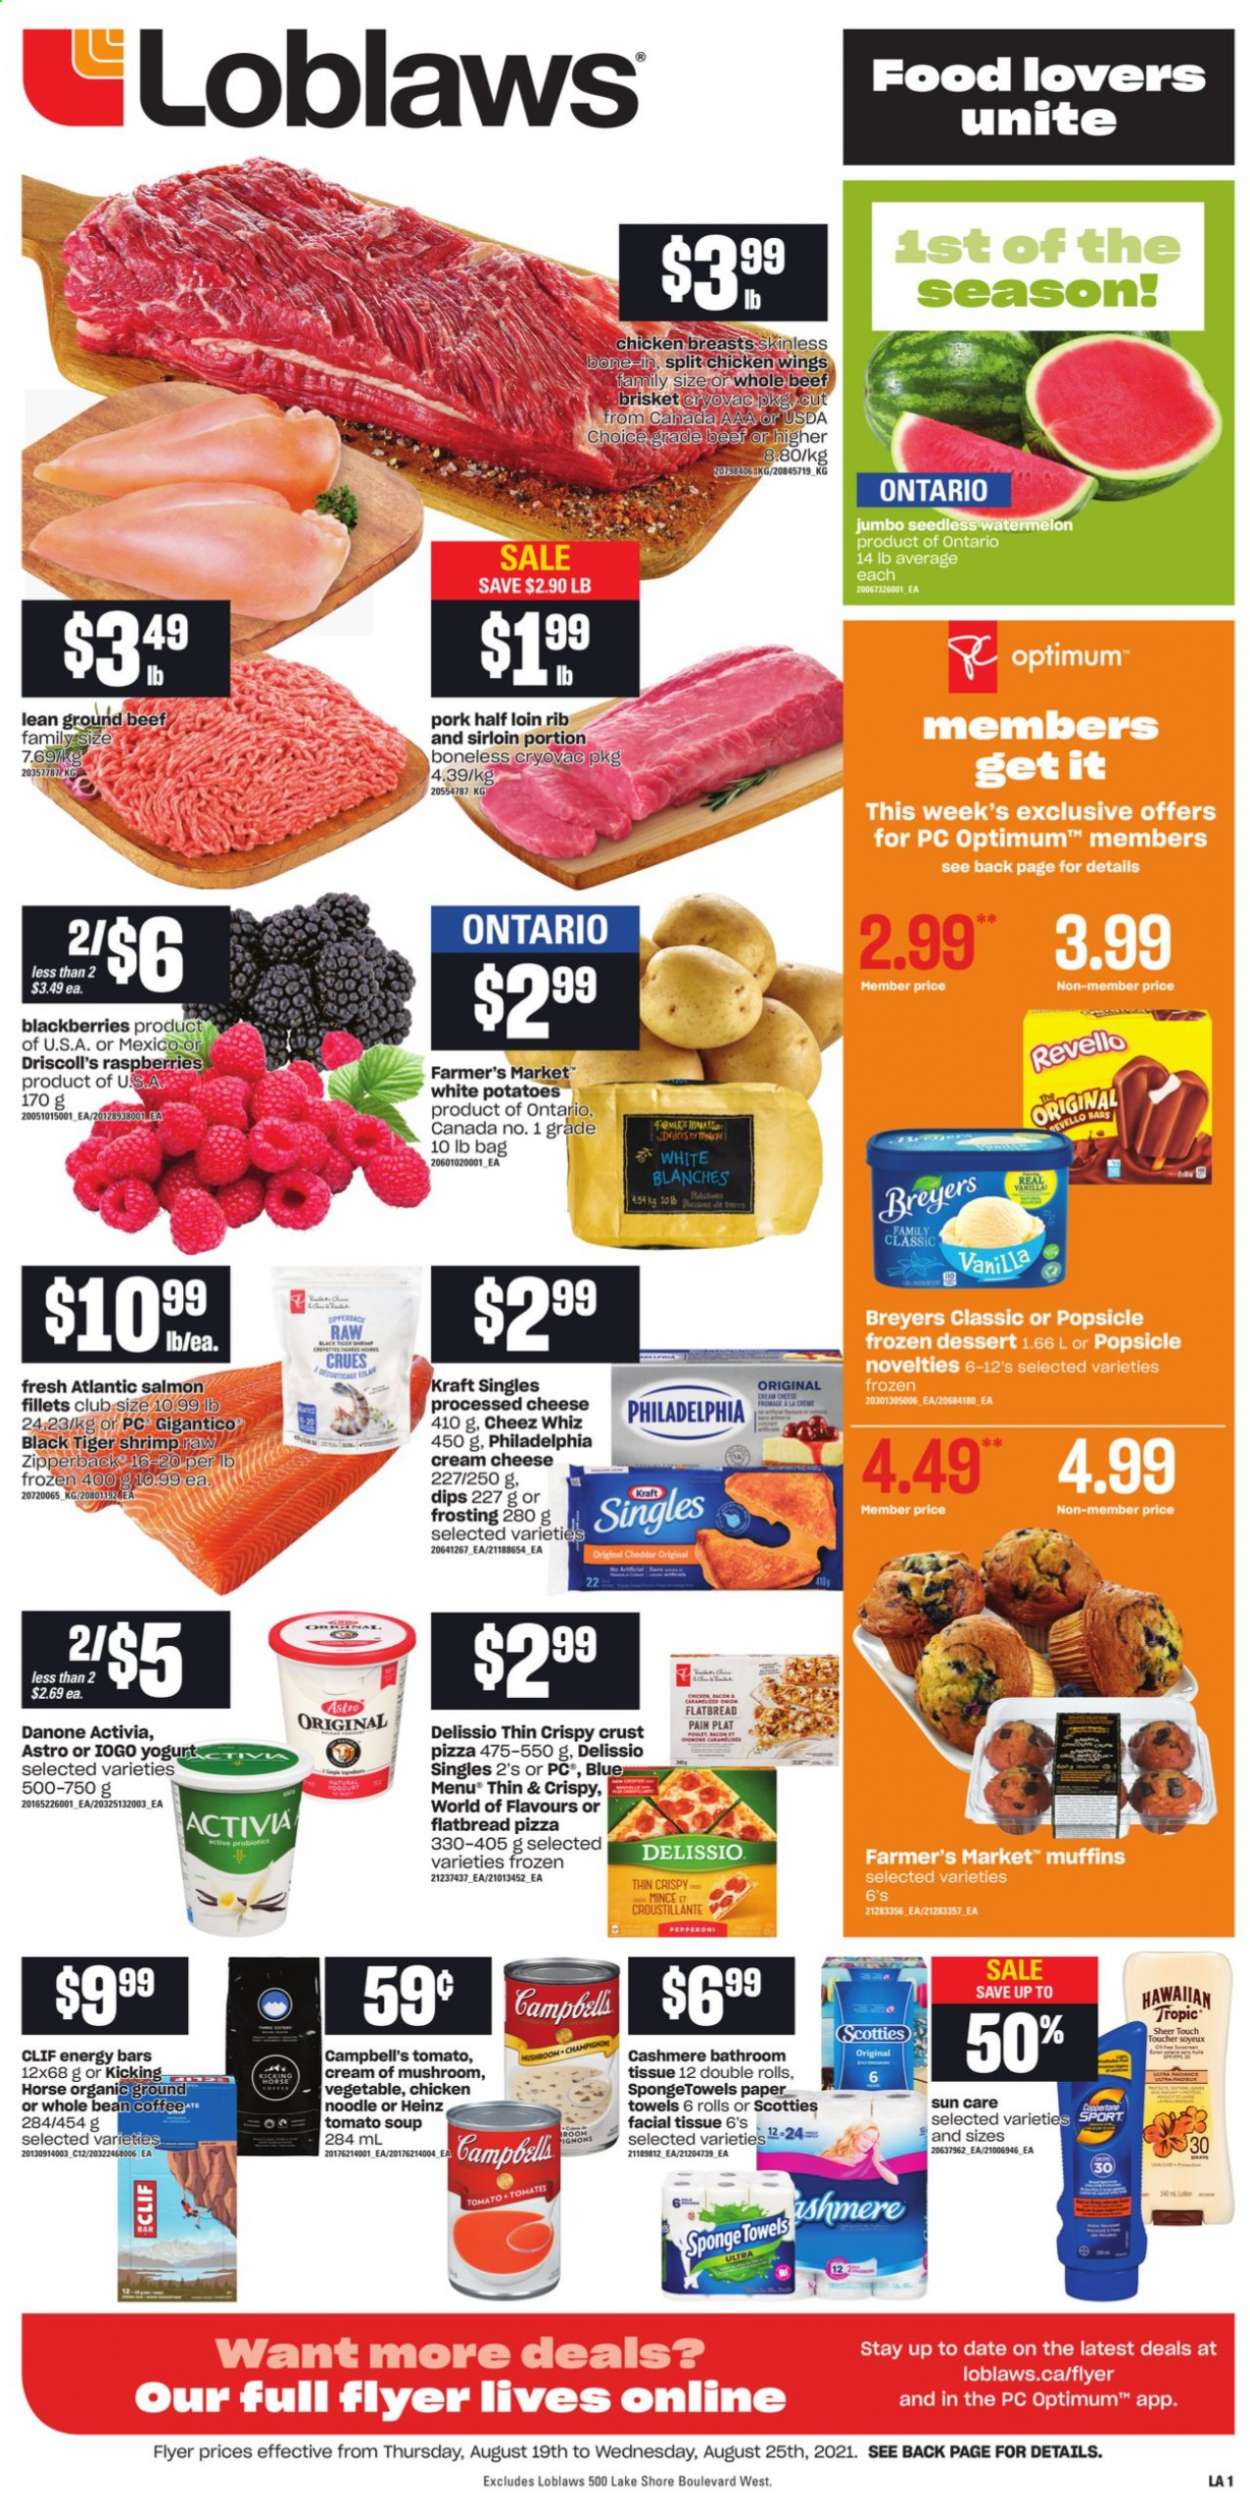 thumbnail - Loblaws Flyer - August 19, 2021 - August 25, 2021 - Sales products - flatbread, muffin, potatoes, blackberries, watermelon, salmon, salmon fillet, shrimps, Campbell's, tomato soup, pizza, soup, noodles, Kraft®, cream cheese, sandwich slices, cheddar, Kraft Singles, yoghurt, Activia, chicken wings, frosting, Heinz, energy bar, coffee, chicken breasts, beef meat, ground beef, beef brisket, bath tissue, kitchen towels, paper towels, Optimum, Danone, Philadelphia. Page 1.